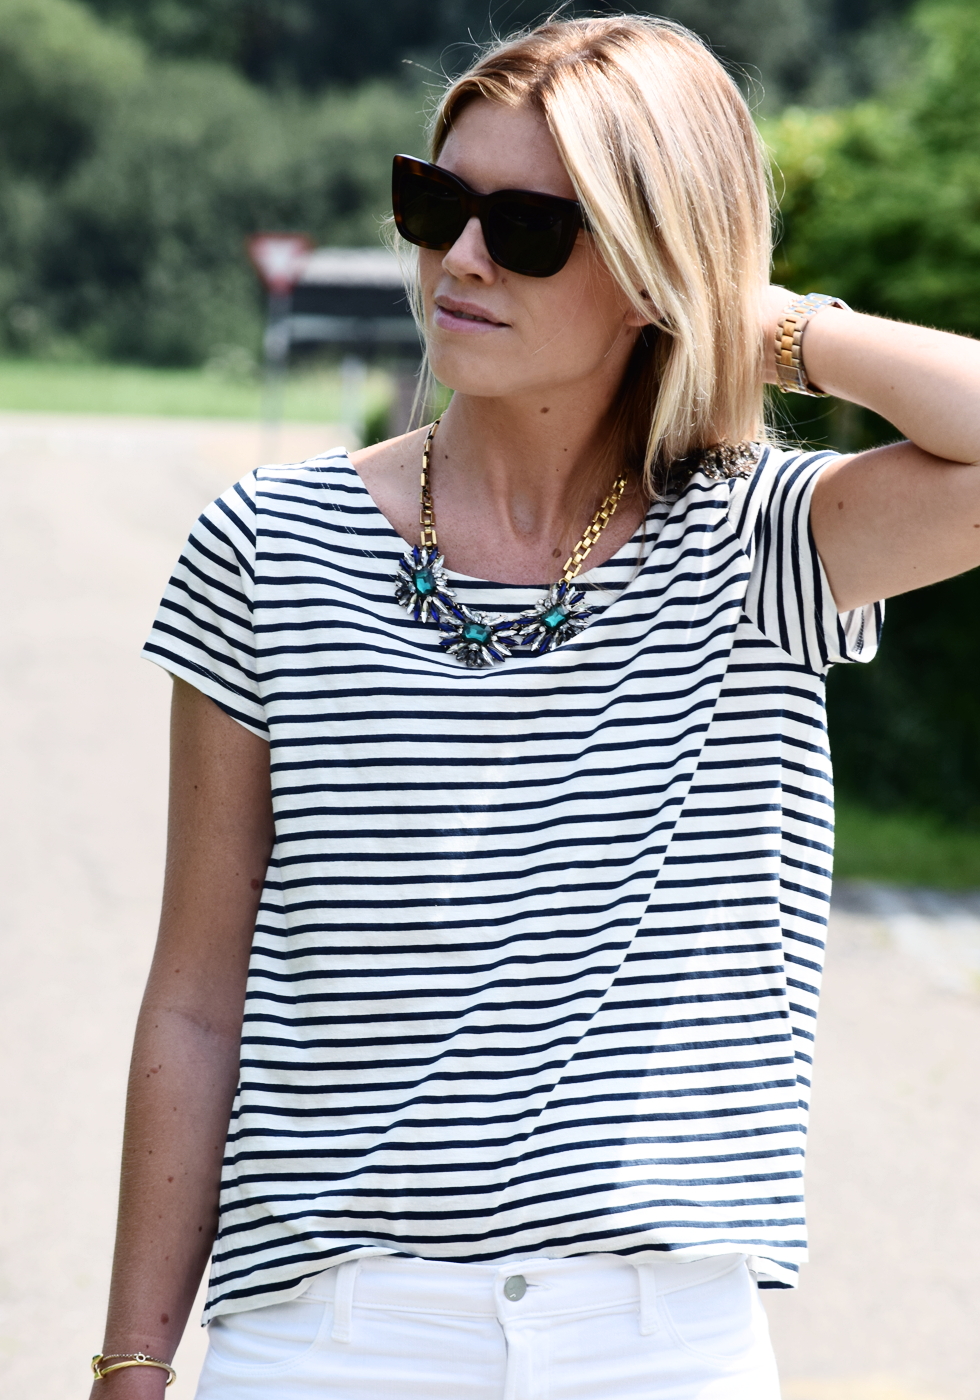 Mirror of Fashion: OUTFIT OF THE DAY // STRIPE AWAY!